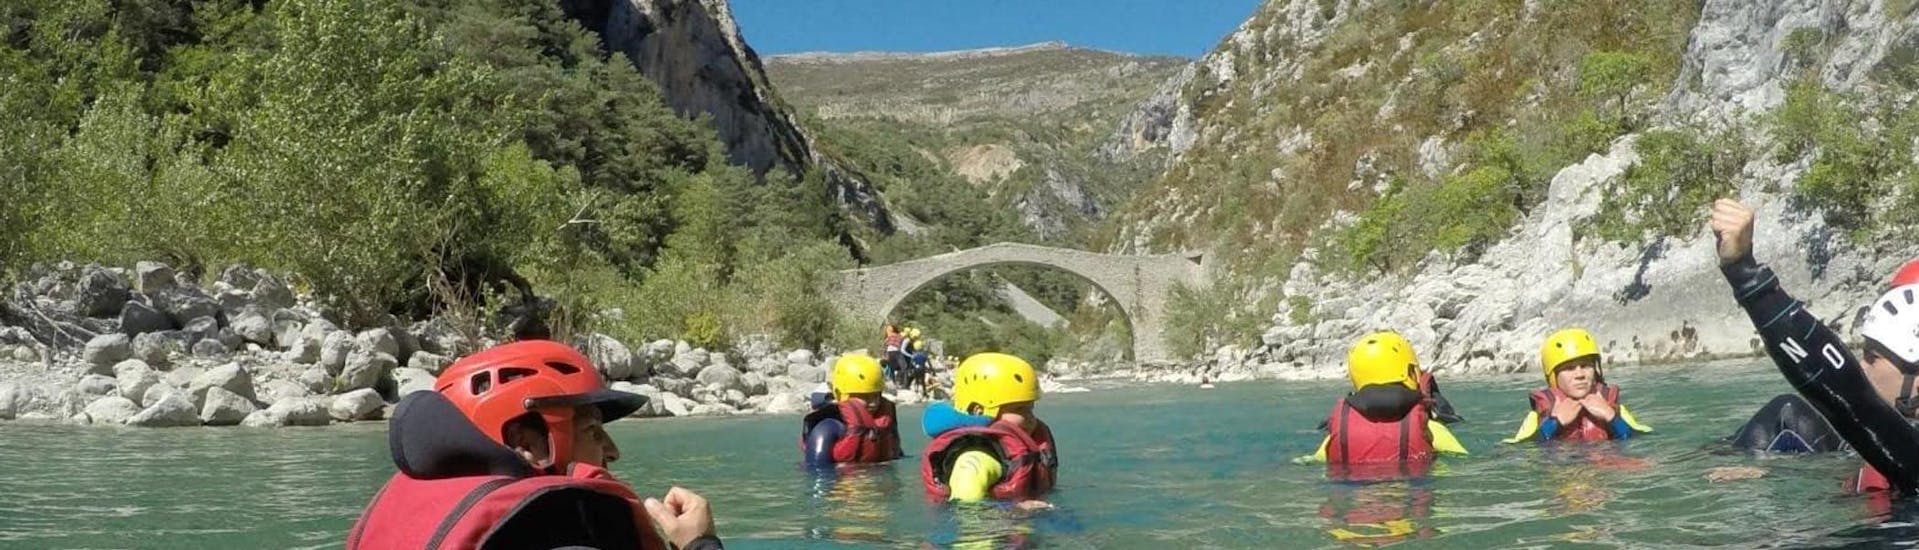 A group is enjoying their River Trekking in Pont de Tusset - Discovery activity operated by Haute Provence Outdoor.